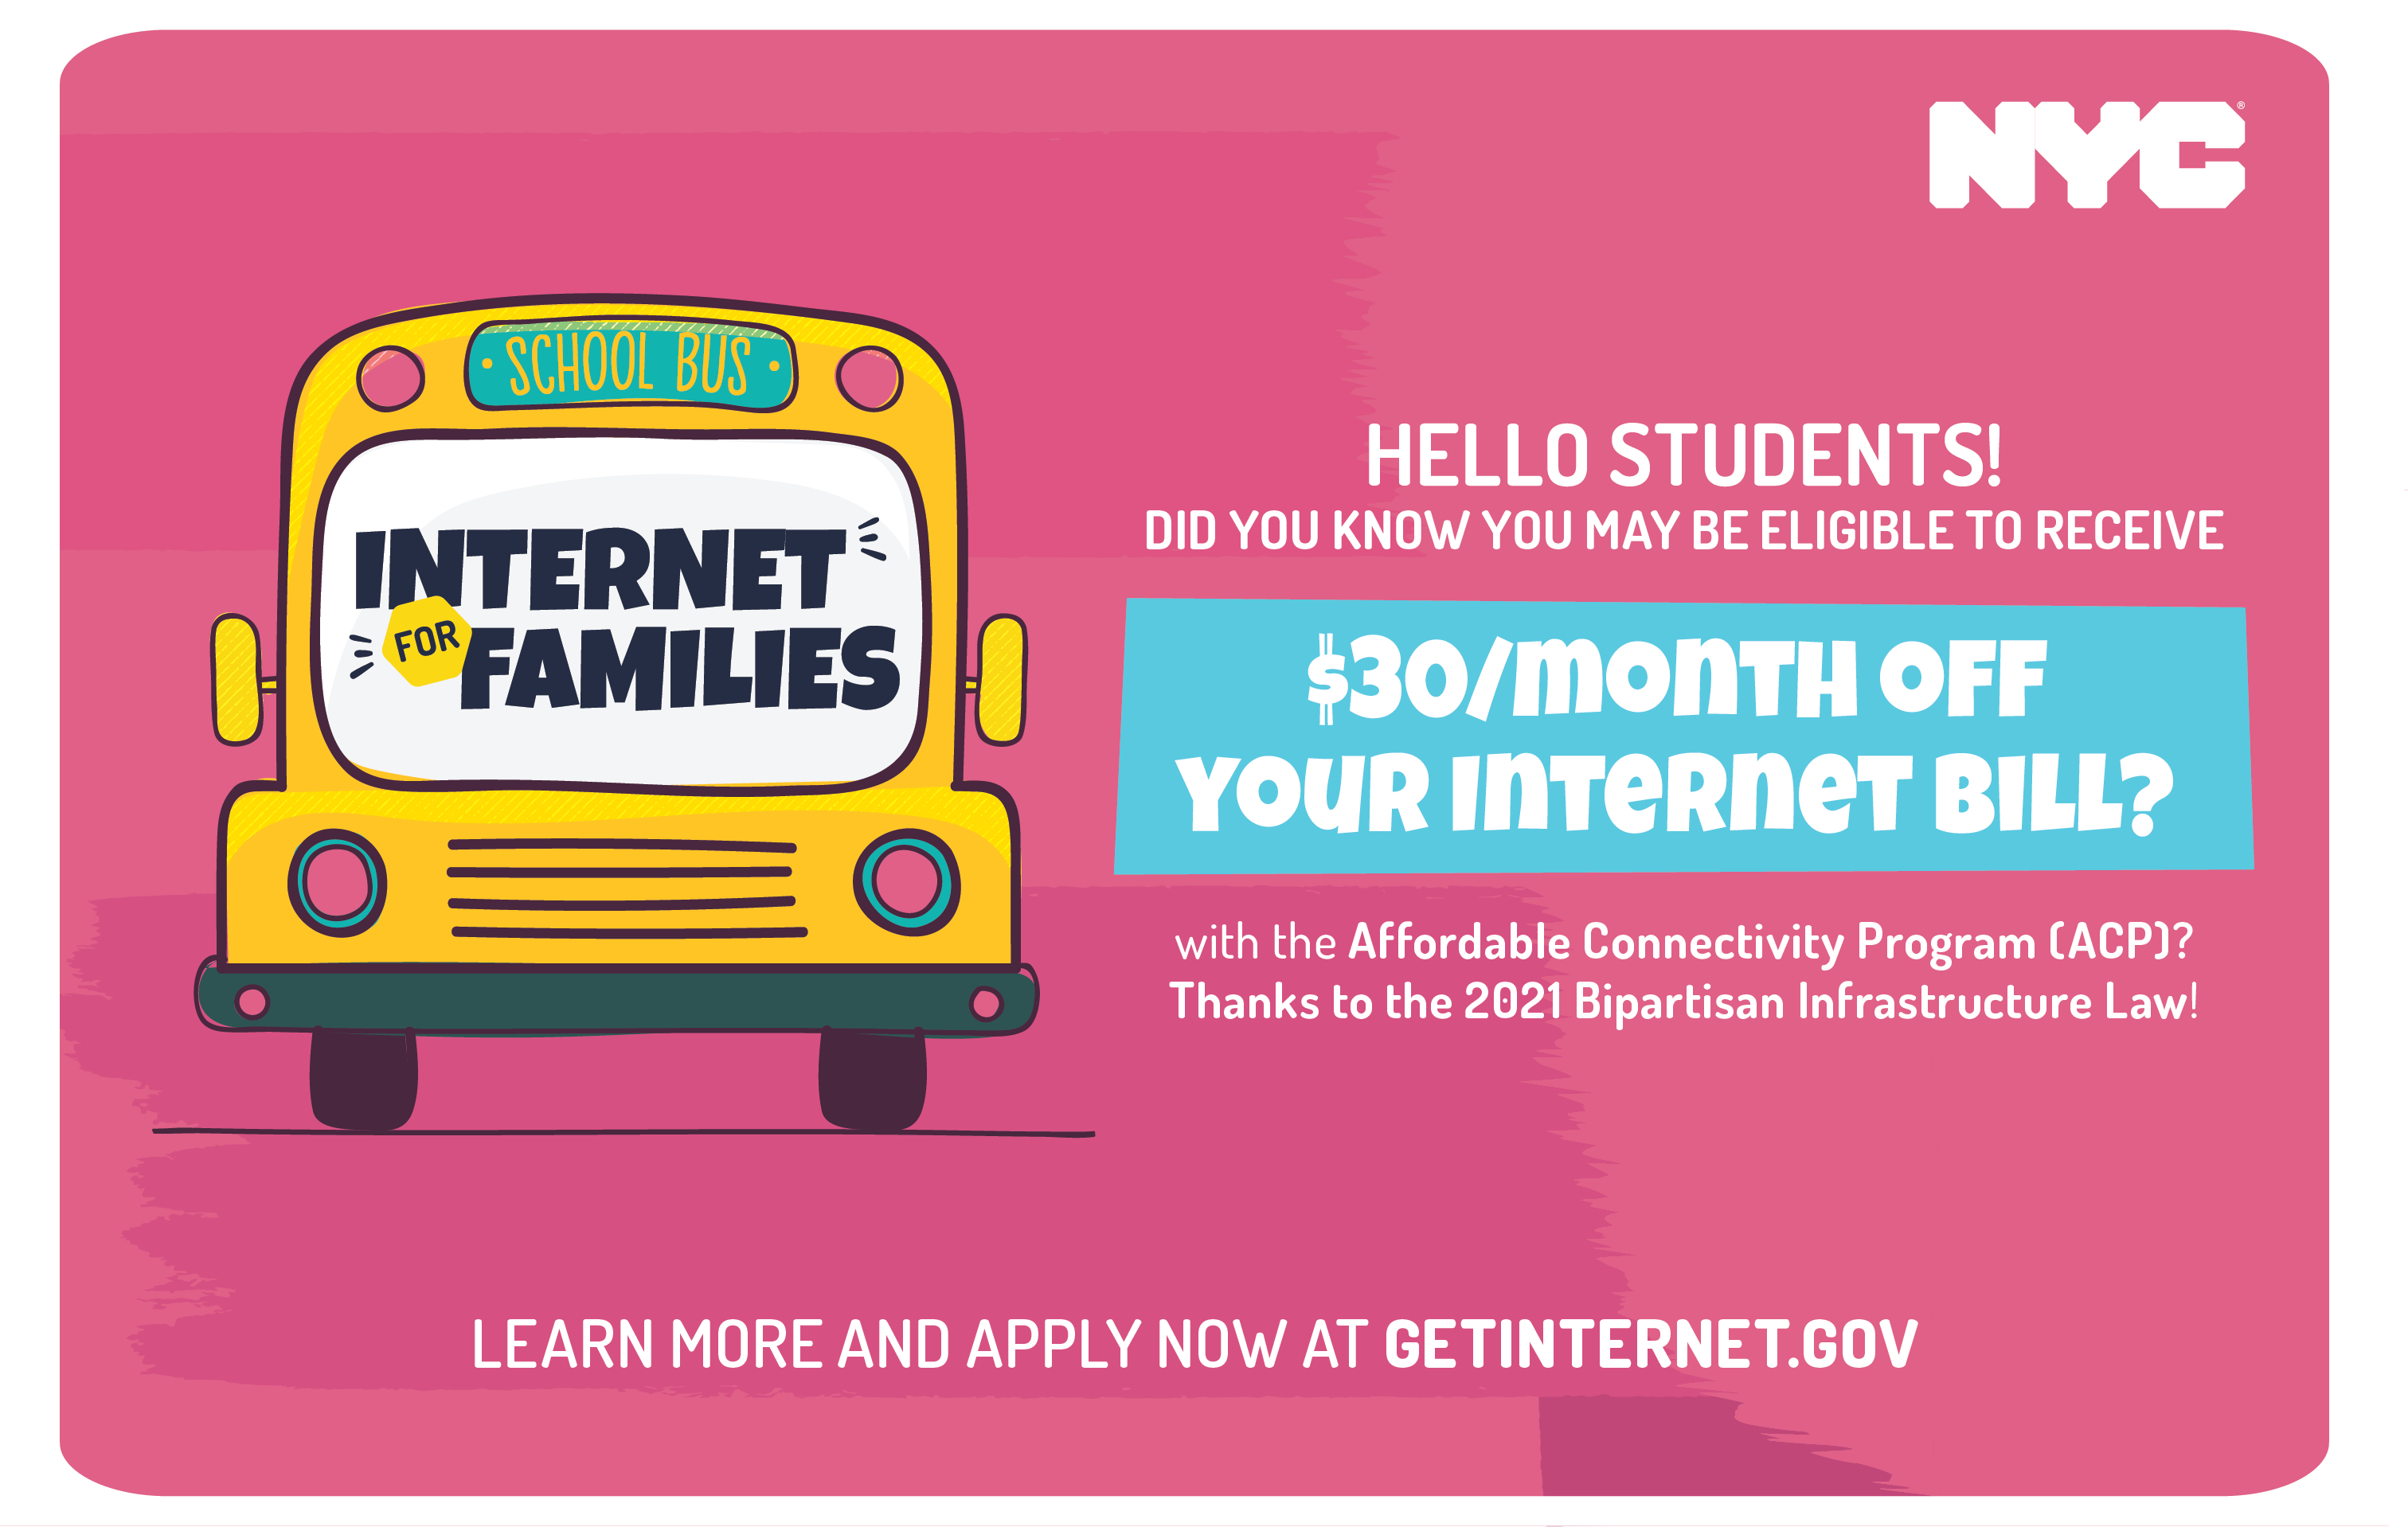 Hello Students! Did you know you may be eligible to receive $30/month off your internet bill? with the Affordable Connectivity Program (ACP)? Thanks to the 2021 Bipartisan Infrastructure Law! Learn more and apply now at GetInternet.Gov